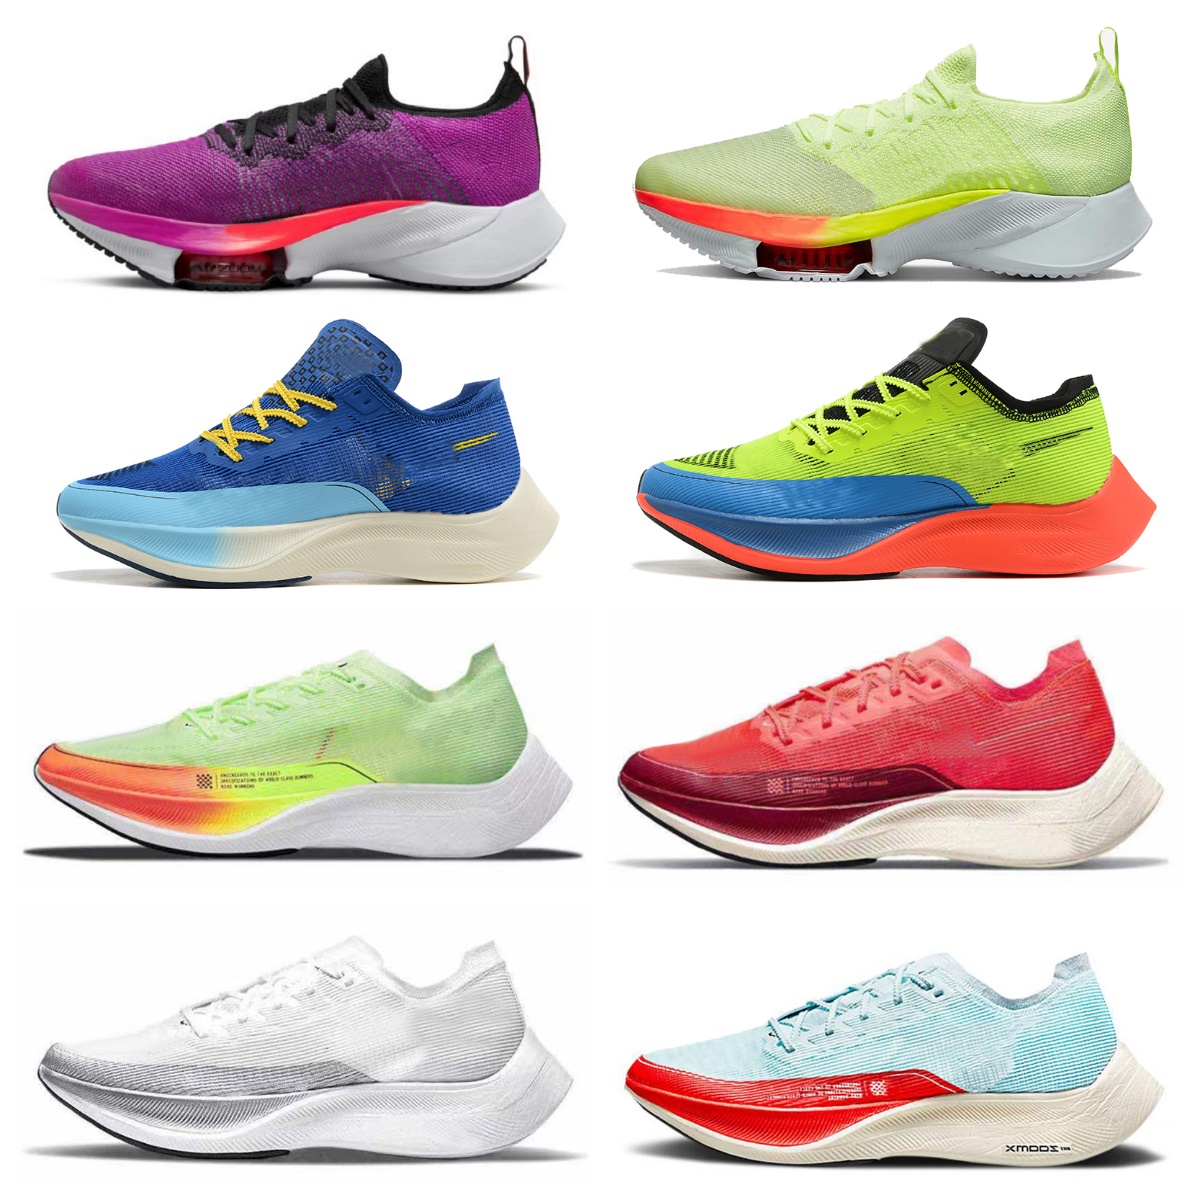 

NEW Zoomx Vaporfly Next% Casual Shoes metallic gold coin Volt Dark Smoke Grey Tempo Fly knit Hyper Violet Crimson White Black Watermelon Blue Ribbon runners Sneakers, Bubble package bag